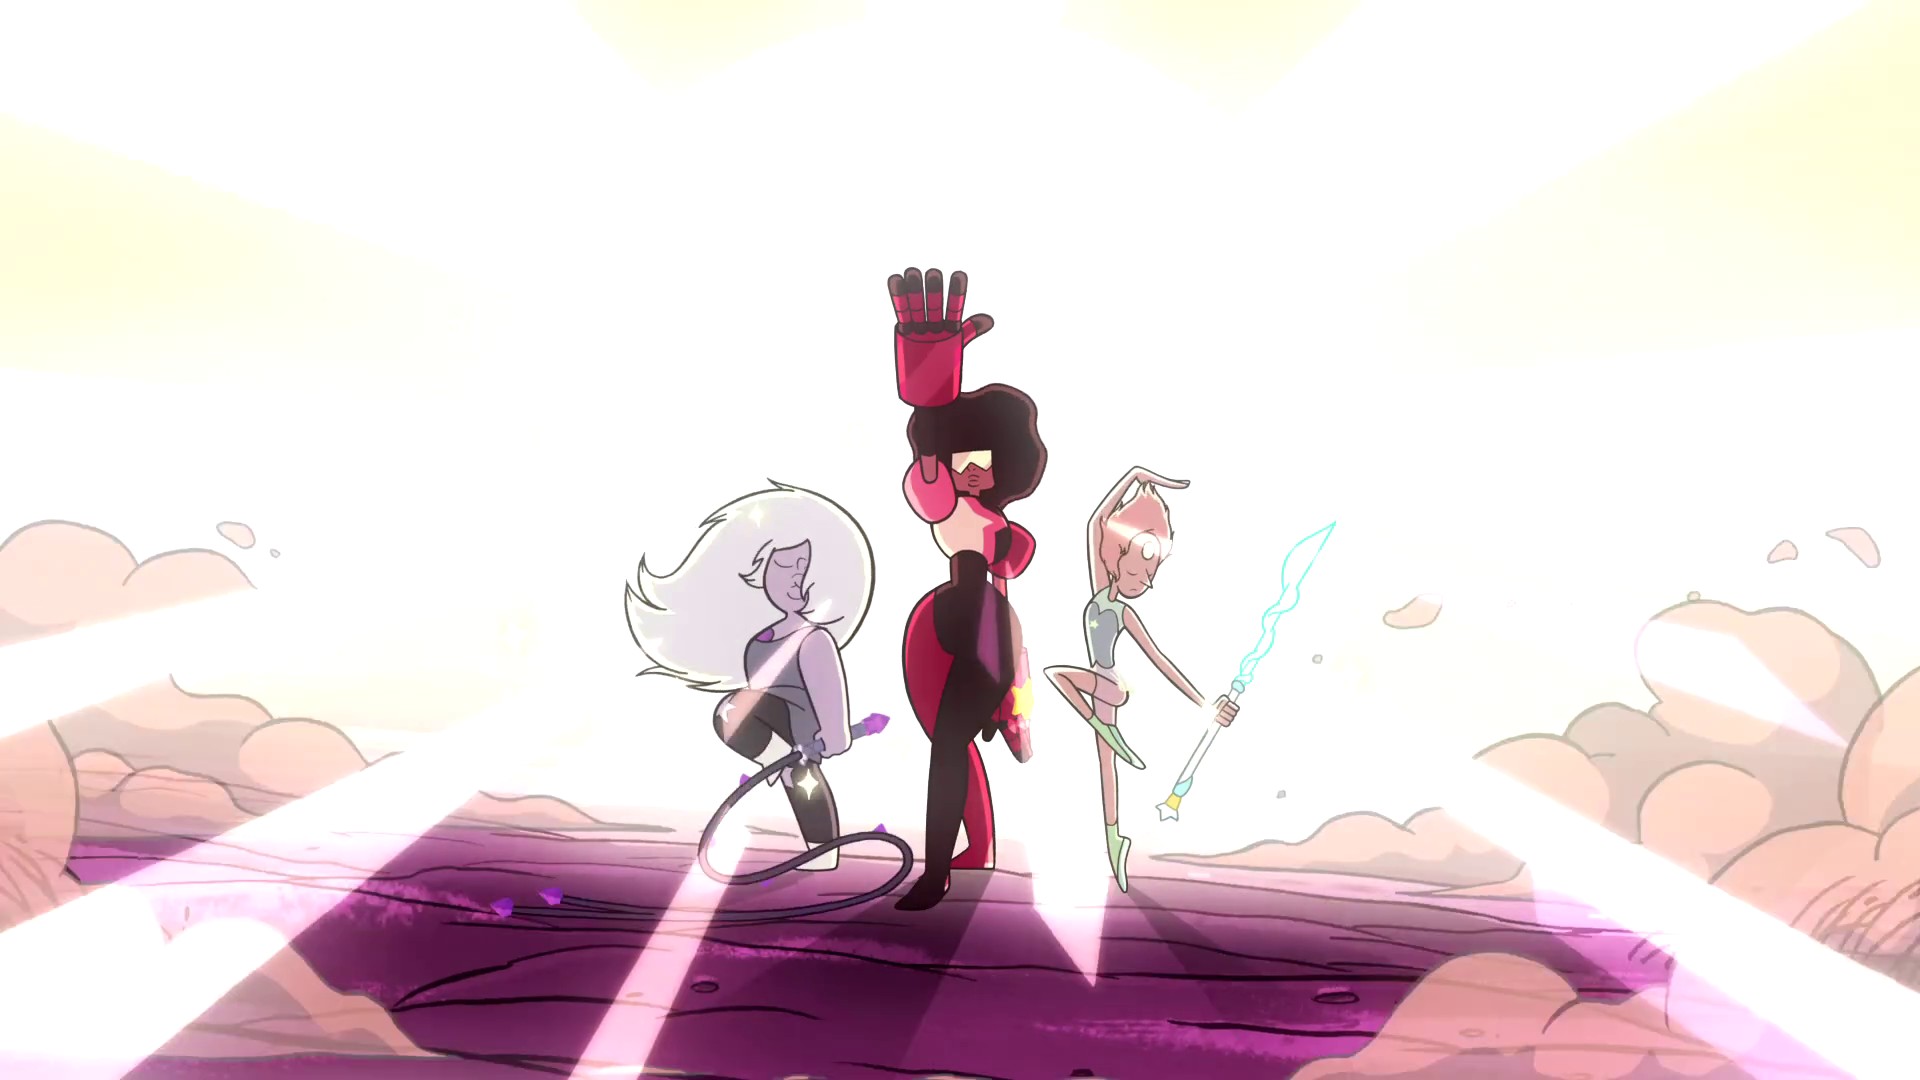 Steven Universe The Movie Desktop Backgrounds HD with high-resolution 1920x1080 pixel. You can use this wallpaper for your Windows and Mac OS computers as well as your Android and iPhone smartphones